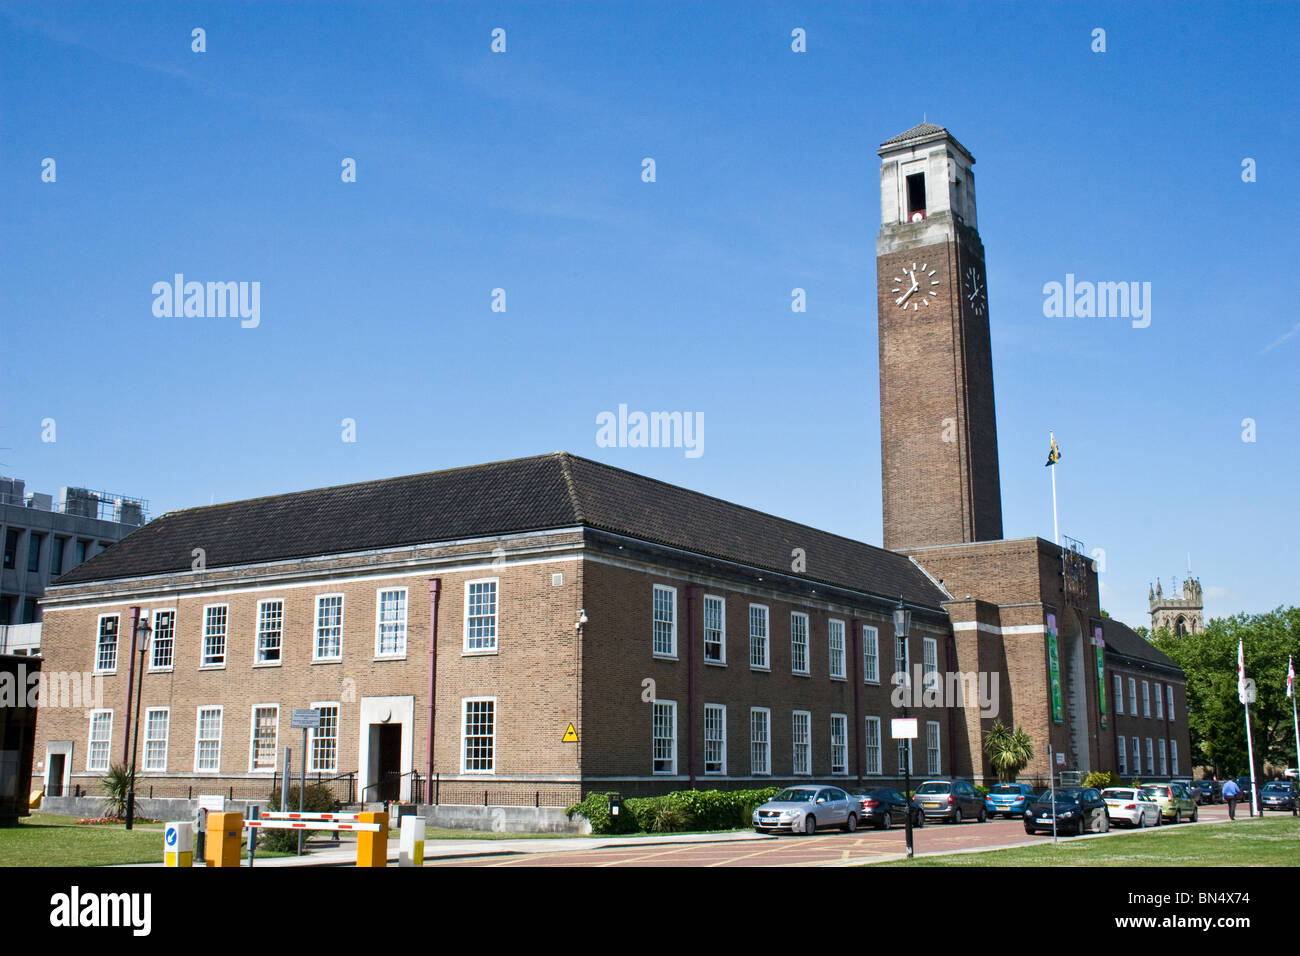 Salford Civic Centre, Swinton, Salford, Greater Manchester, UK. Stock Photo